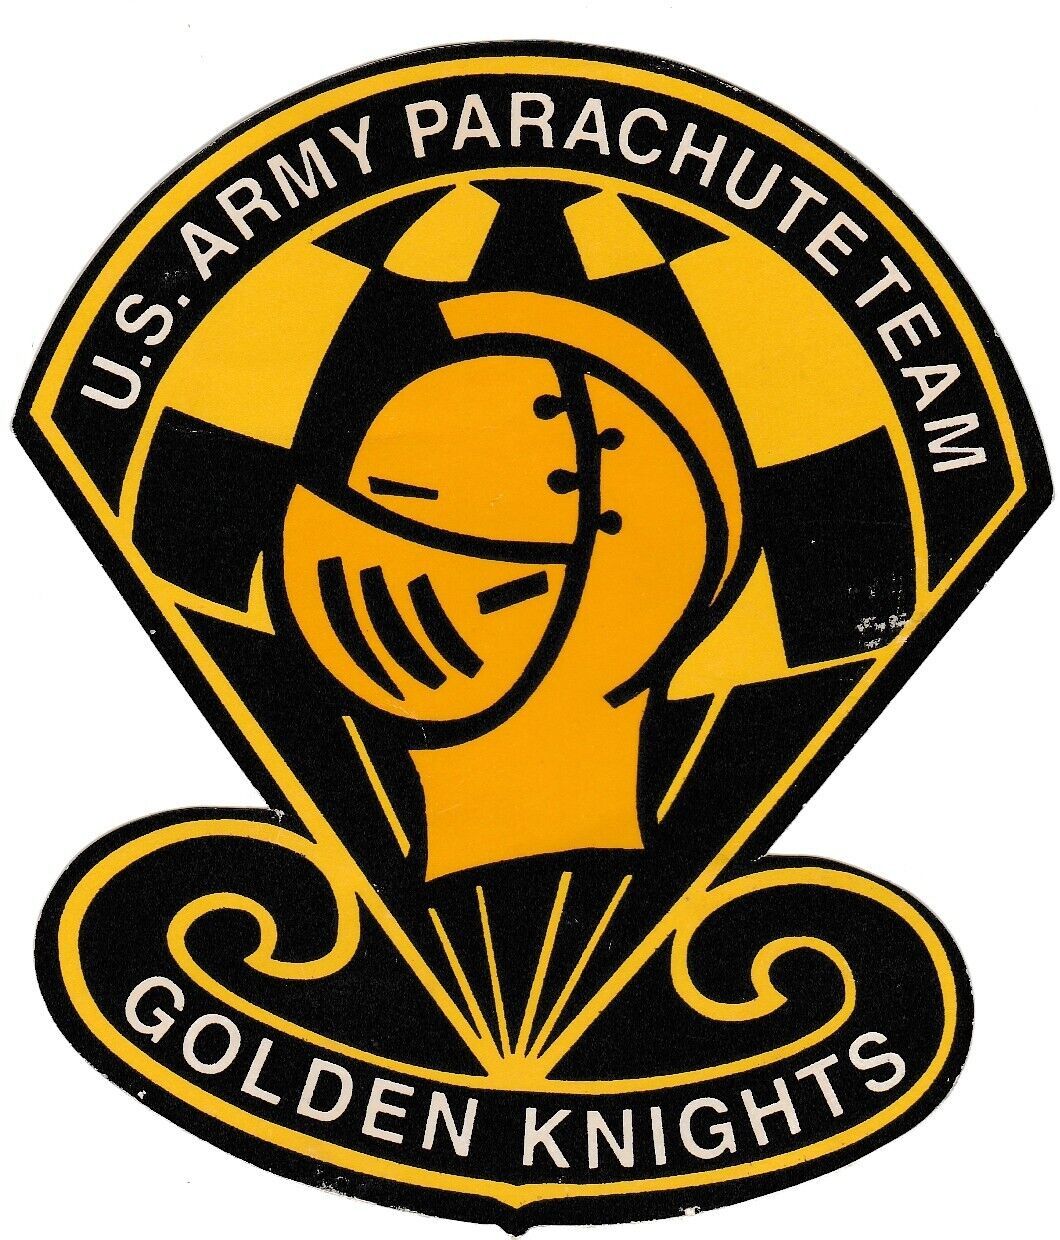 US Army Parachute Golden Knights Military Sticker Vinyl Window Decal 4" Tall - $5.00